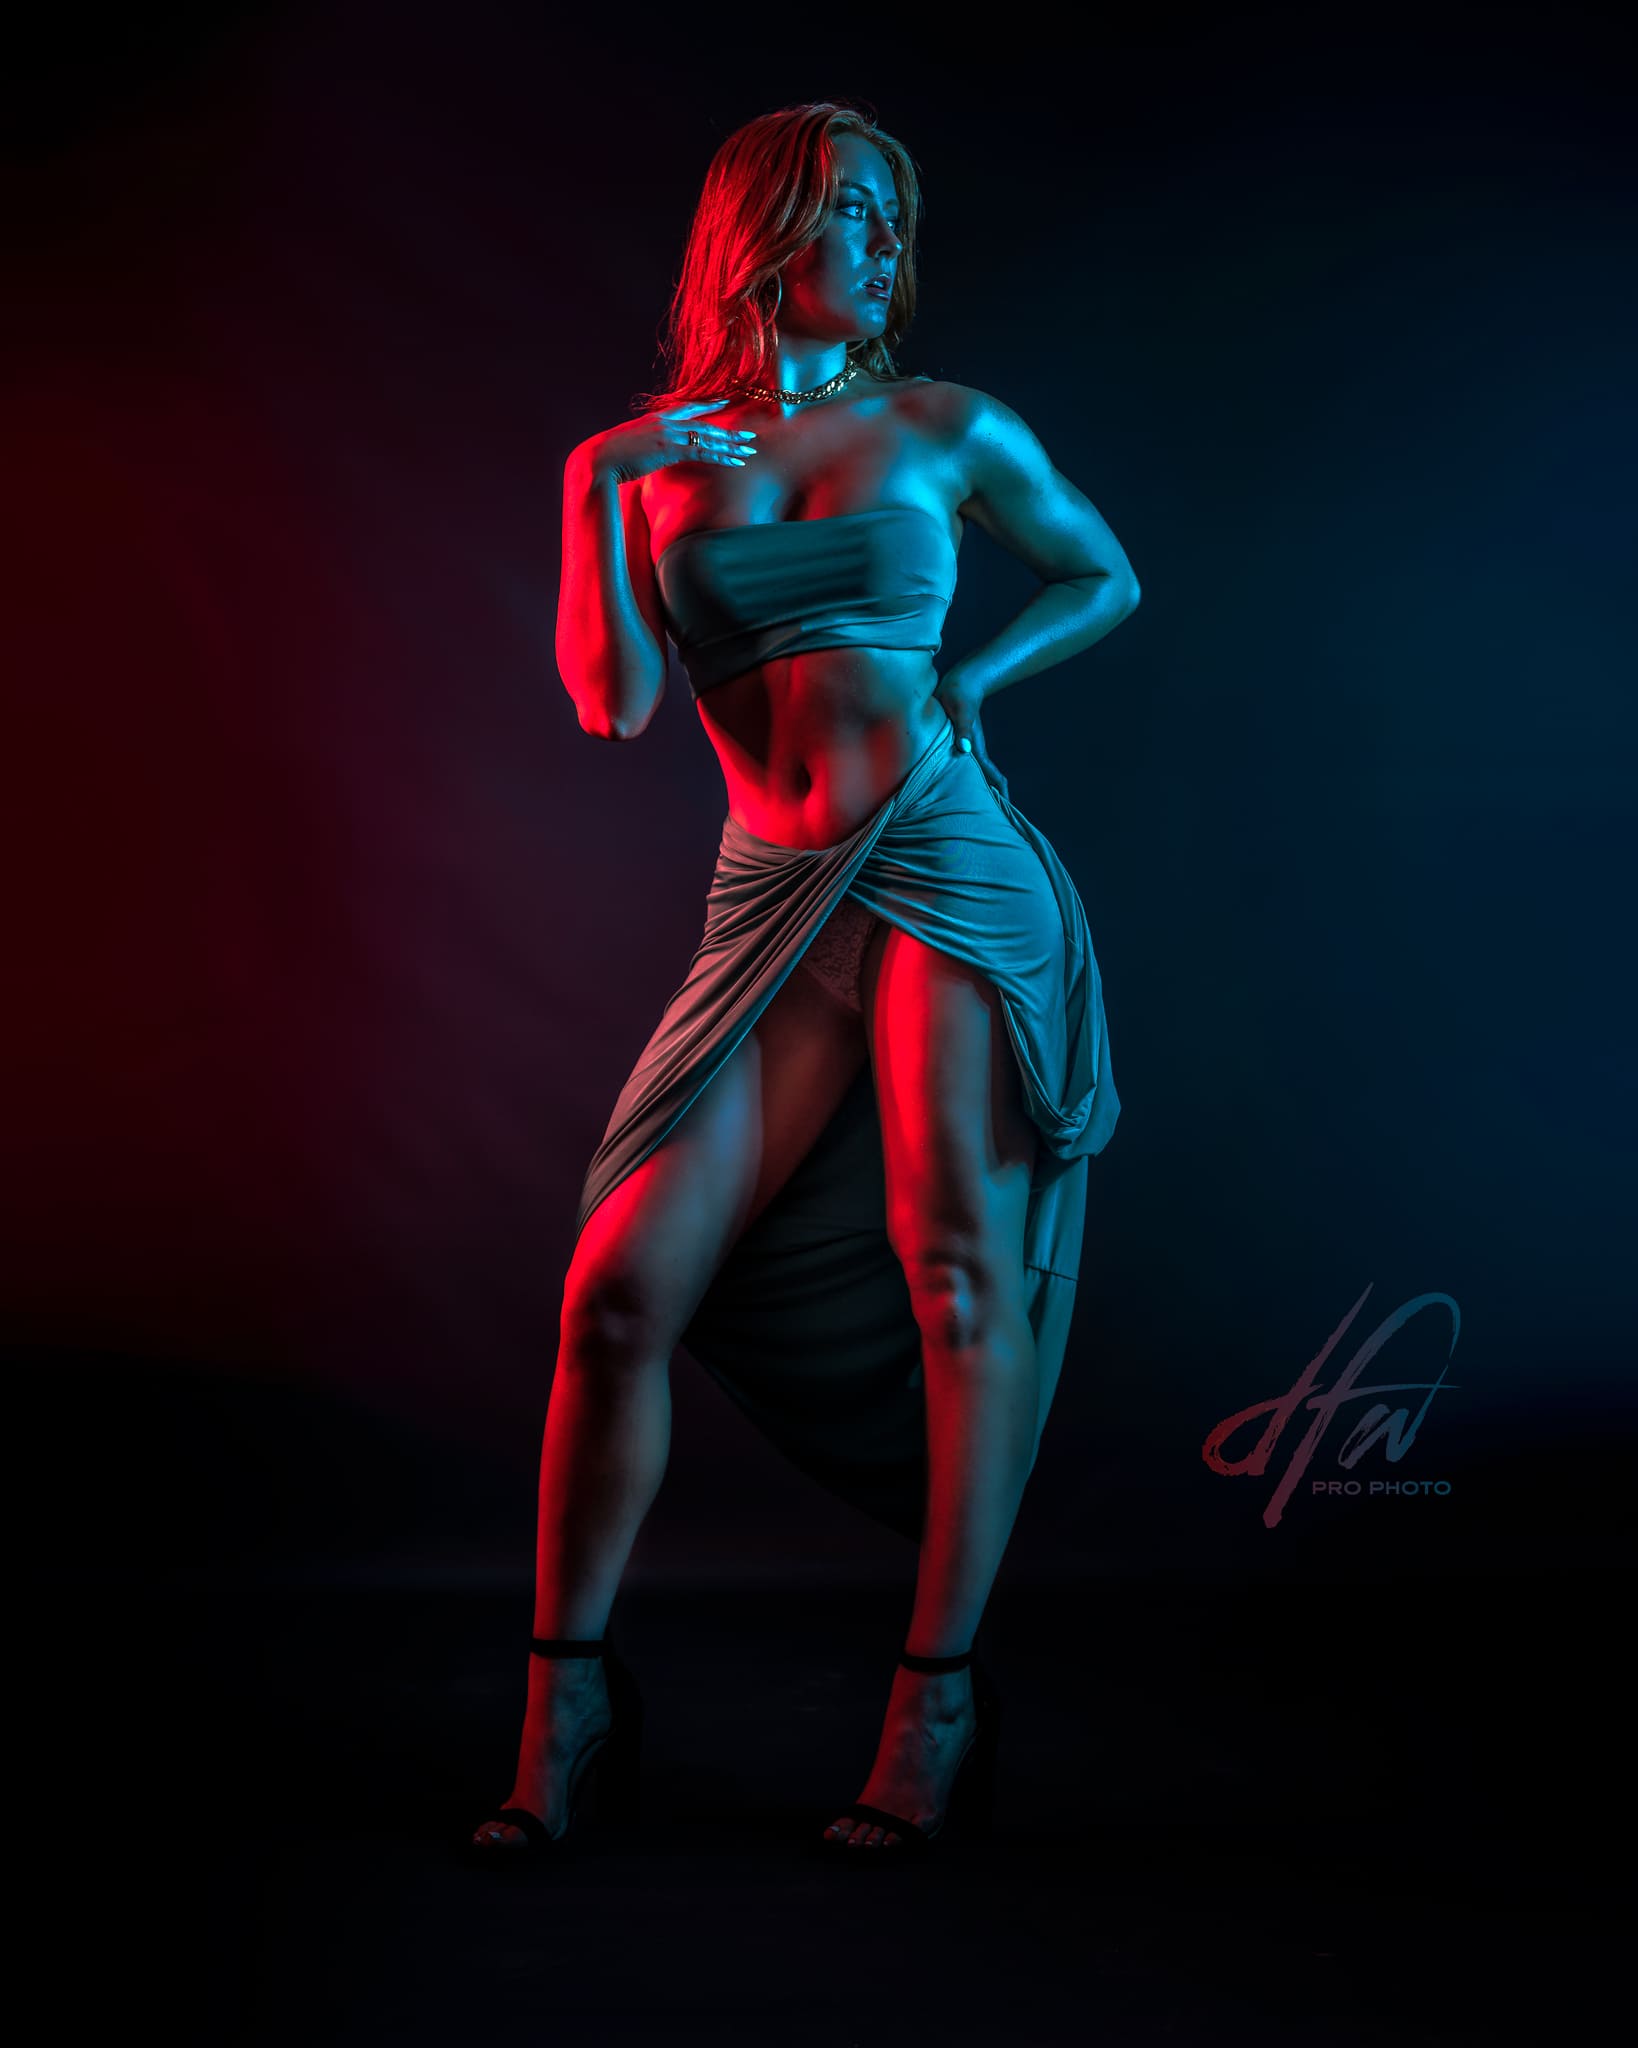 Girl posing with dramatic red and blue lighting.